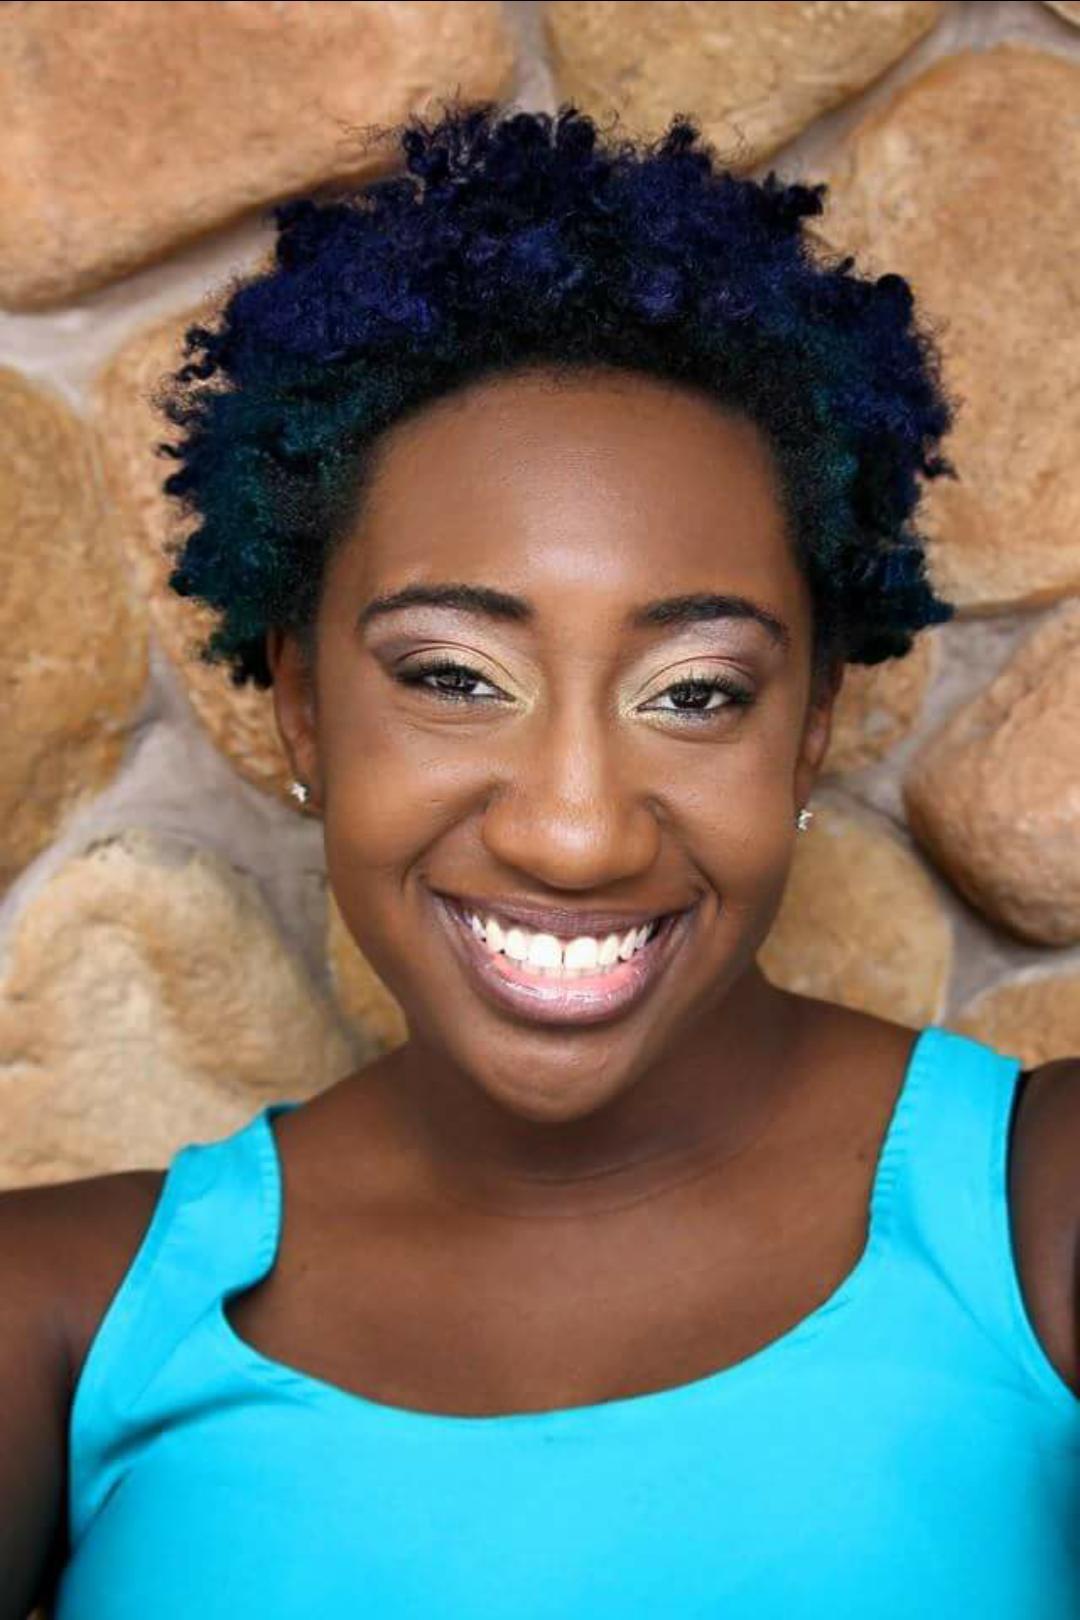 Meet the cast of Smokey Joe's - Amitria Fanae':
Amitria is a native of Miami, Fl. and a graduate of Alabama State University - Montgomery, AL. While there she majored in Theatre and minored in Radio/ TV Communications. Some of her Theatre Credits include; Ain't Misbehavin' (Charliene), Color Purple (Celie), Shrek The Musical (Dragon), Hair (Mary), King Richard III (Queen Margaret), Bat Boy (Ruthie), Crowns (Mother Shaw), The Wiz (Dorothy), Dream Girls (Lorell), A Christmas Story The Musical (Ensemble), Regrets (Mrs.Duke). She sends a special thank you her family for their on going love and support. I love you mom!